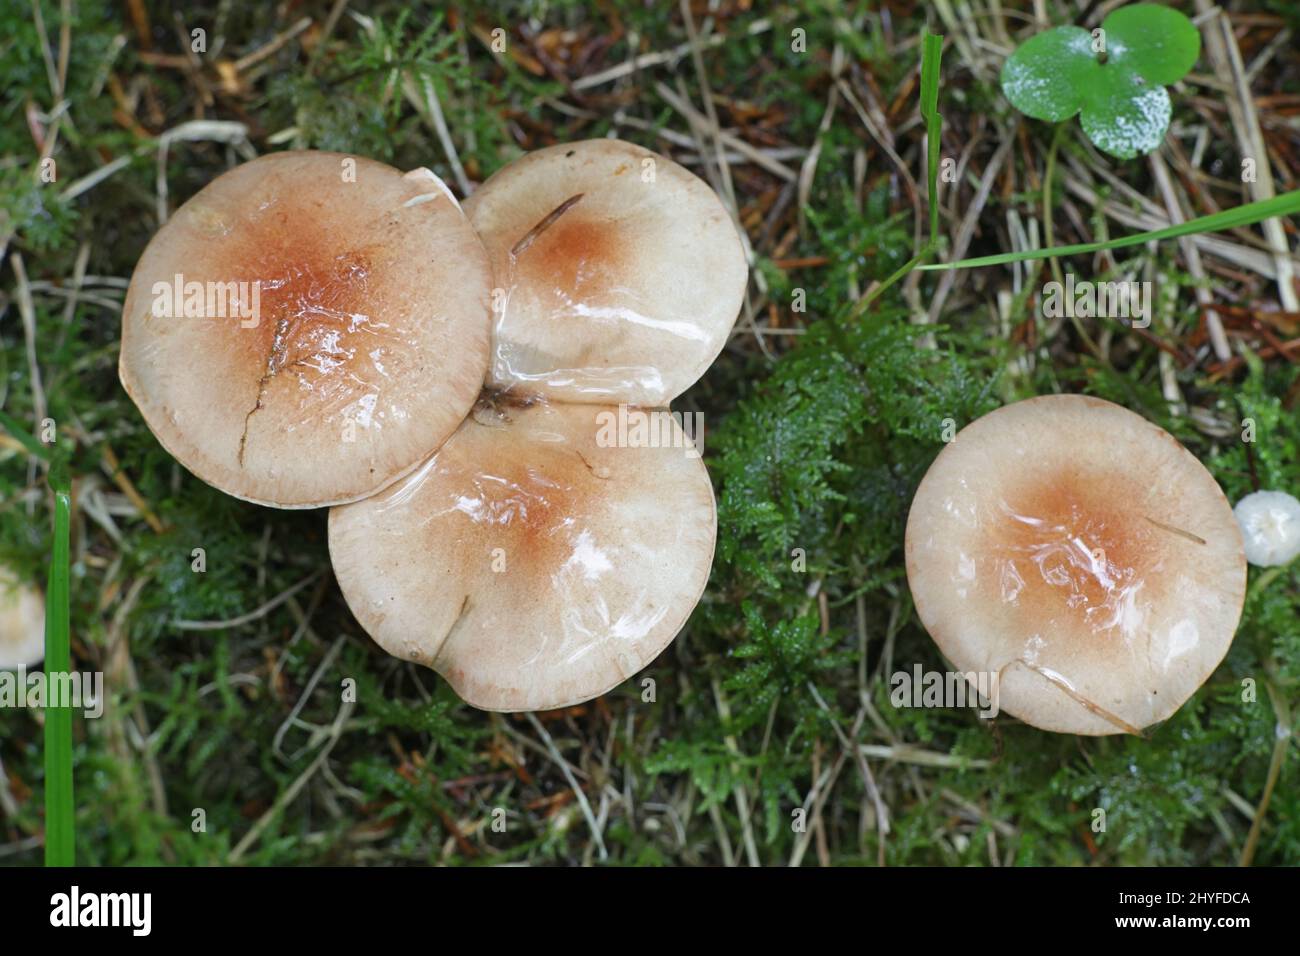 Hebeloma mesophaeum, known as  veiled poisonpie or poison pie, wild mushroom from Finland Stock Photo